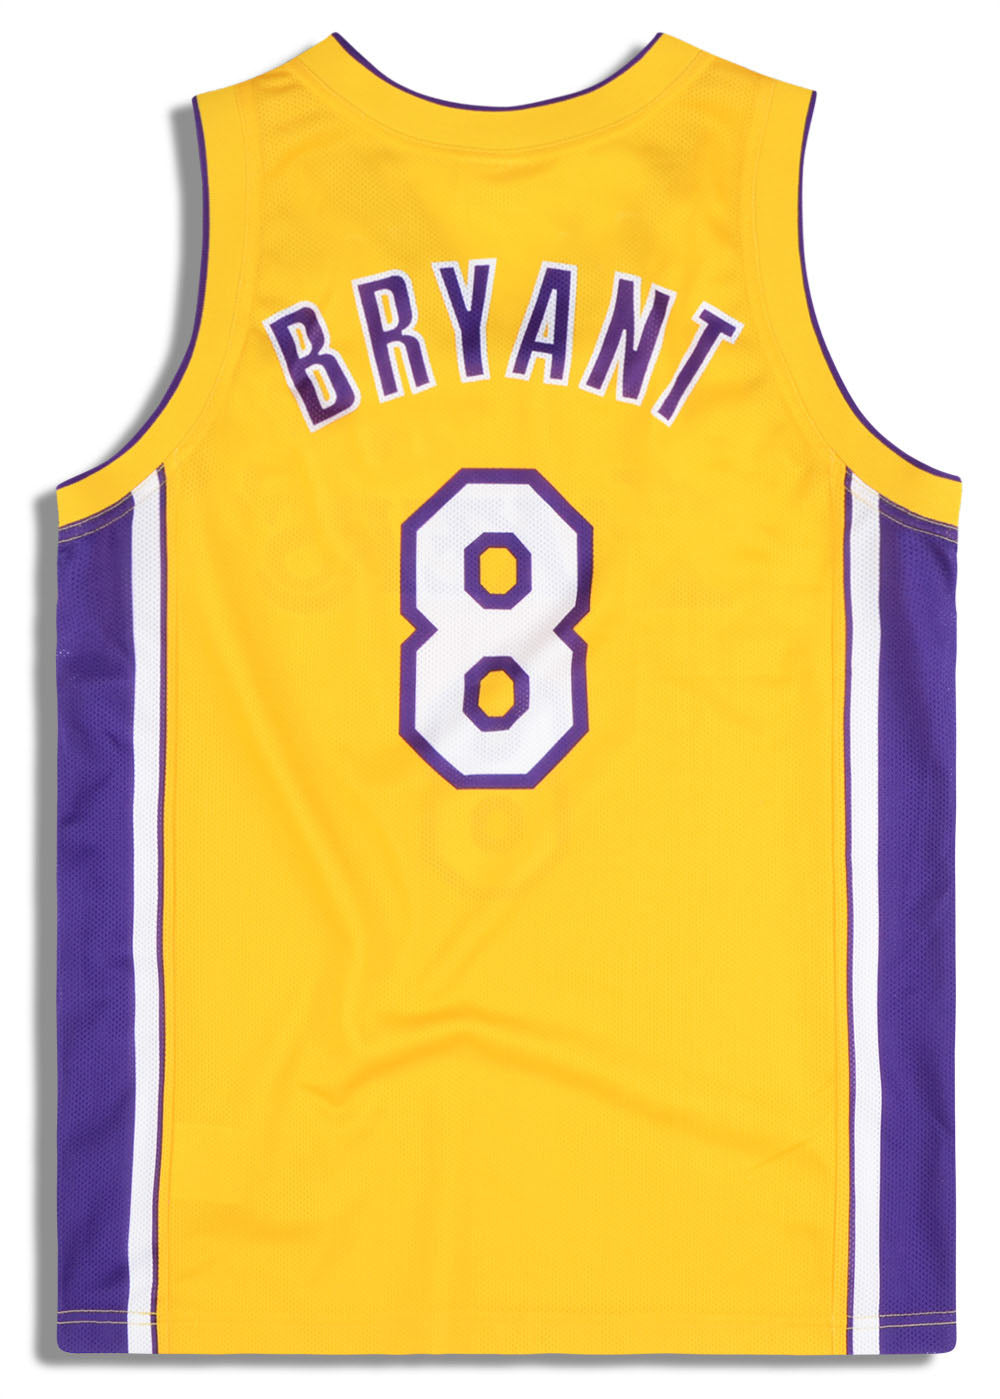 Kobe Bryant Jerseys for sale in Indianapolis, Indiana